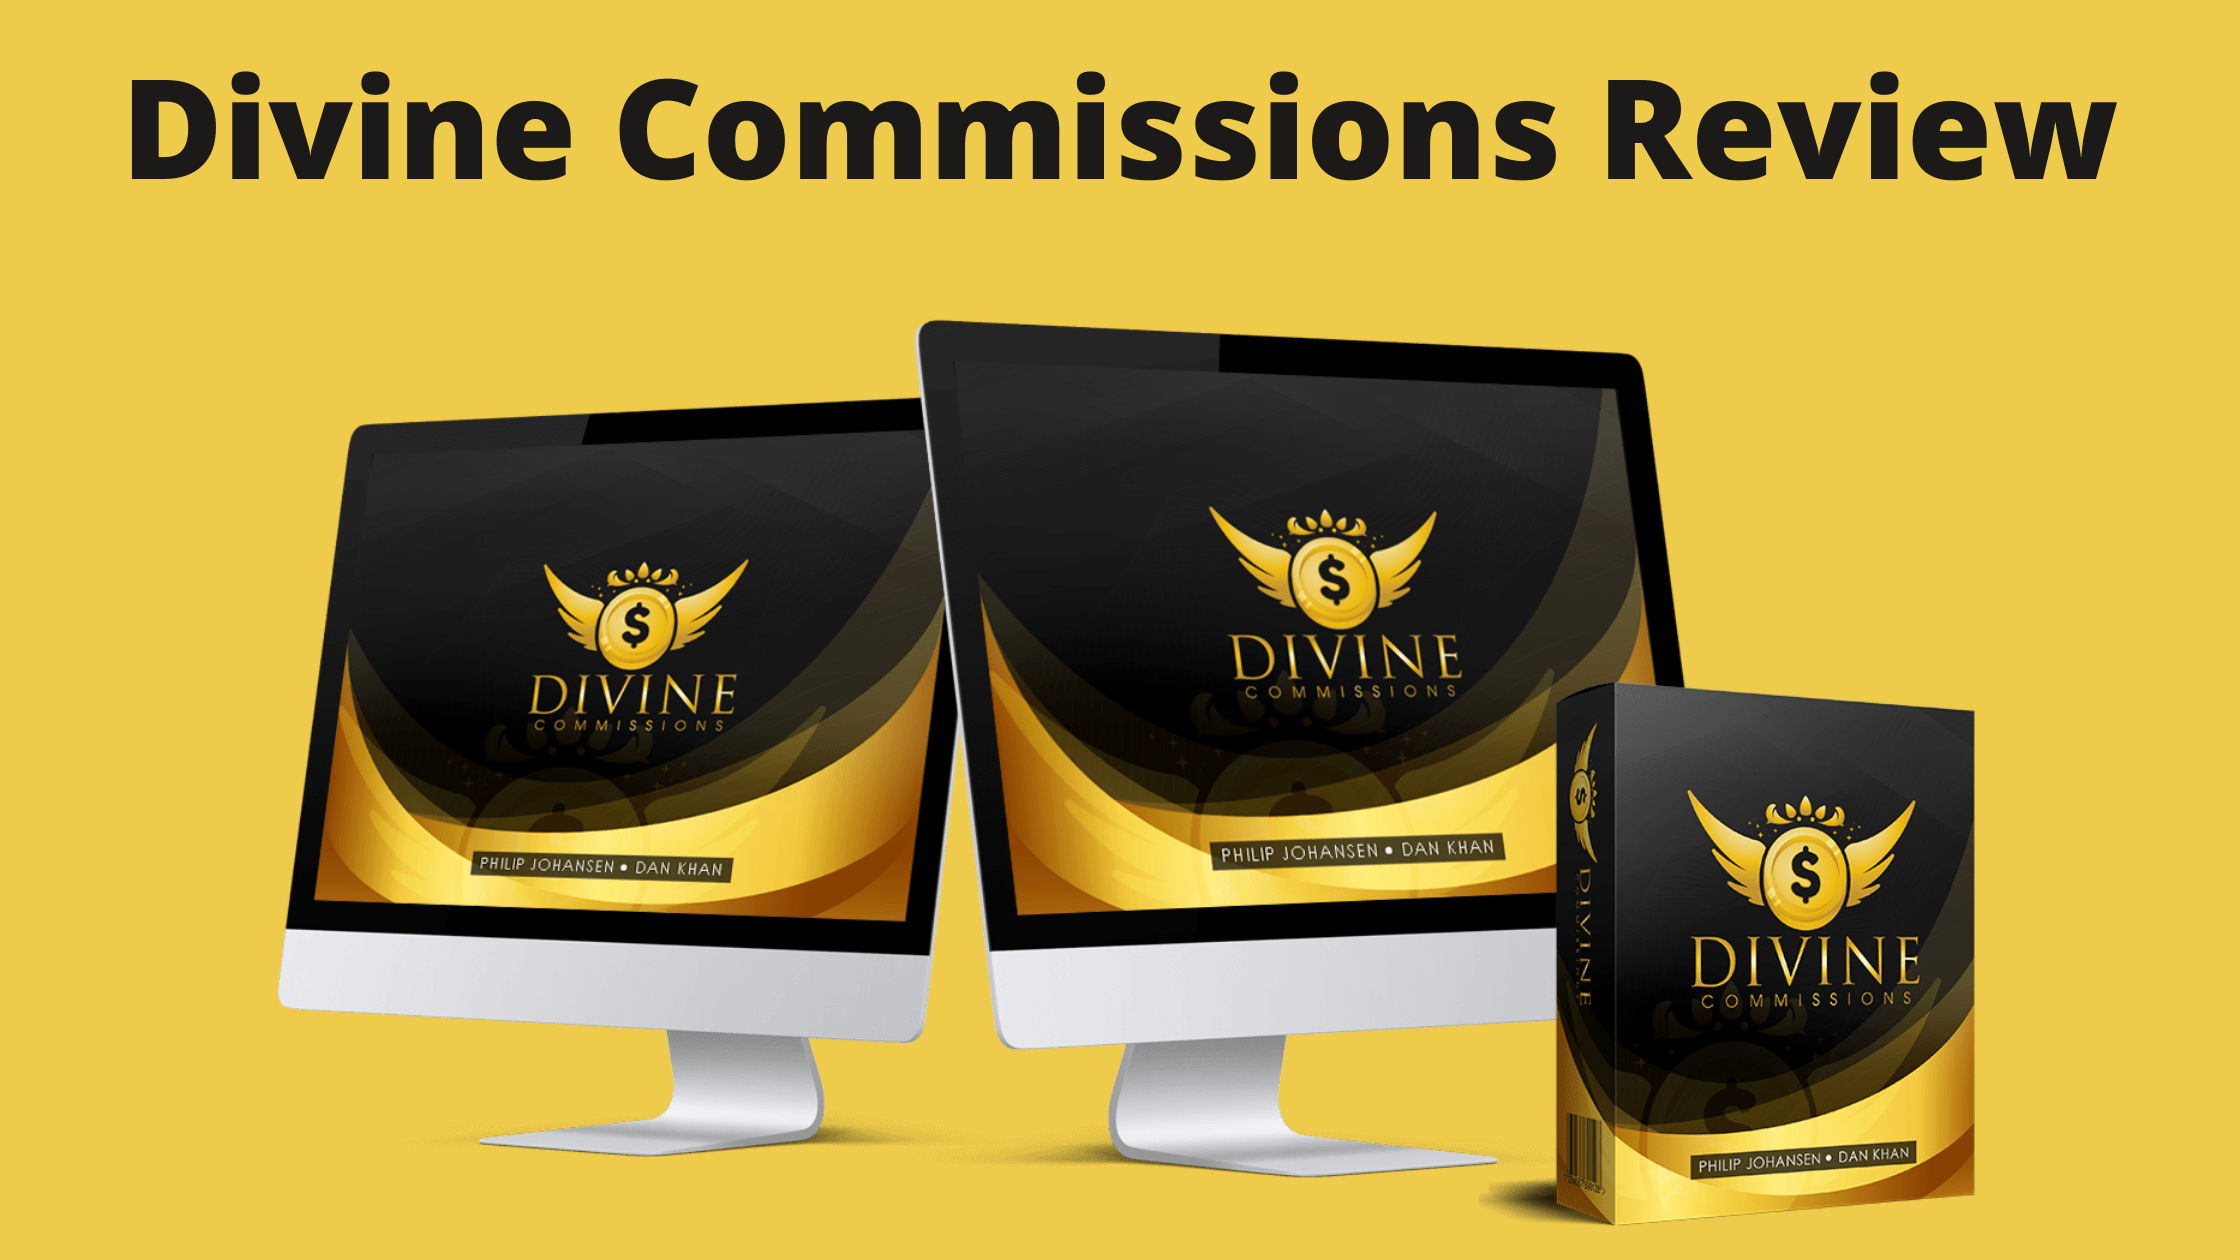 Divine Commissions Review